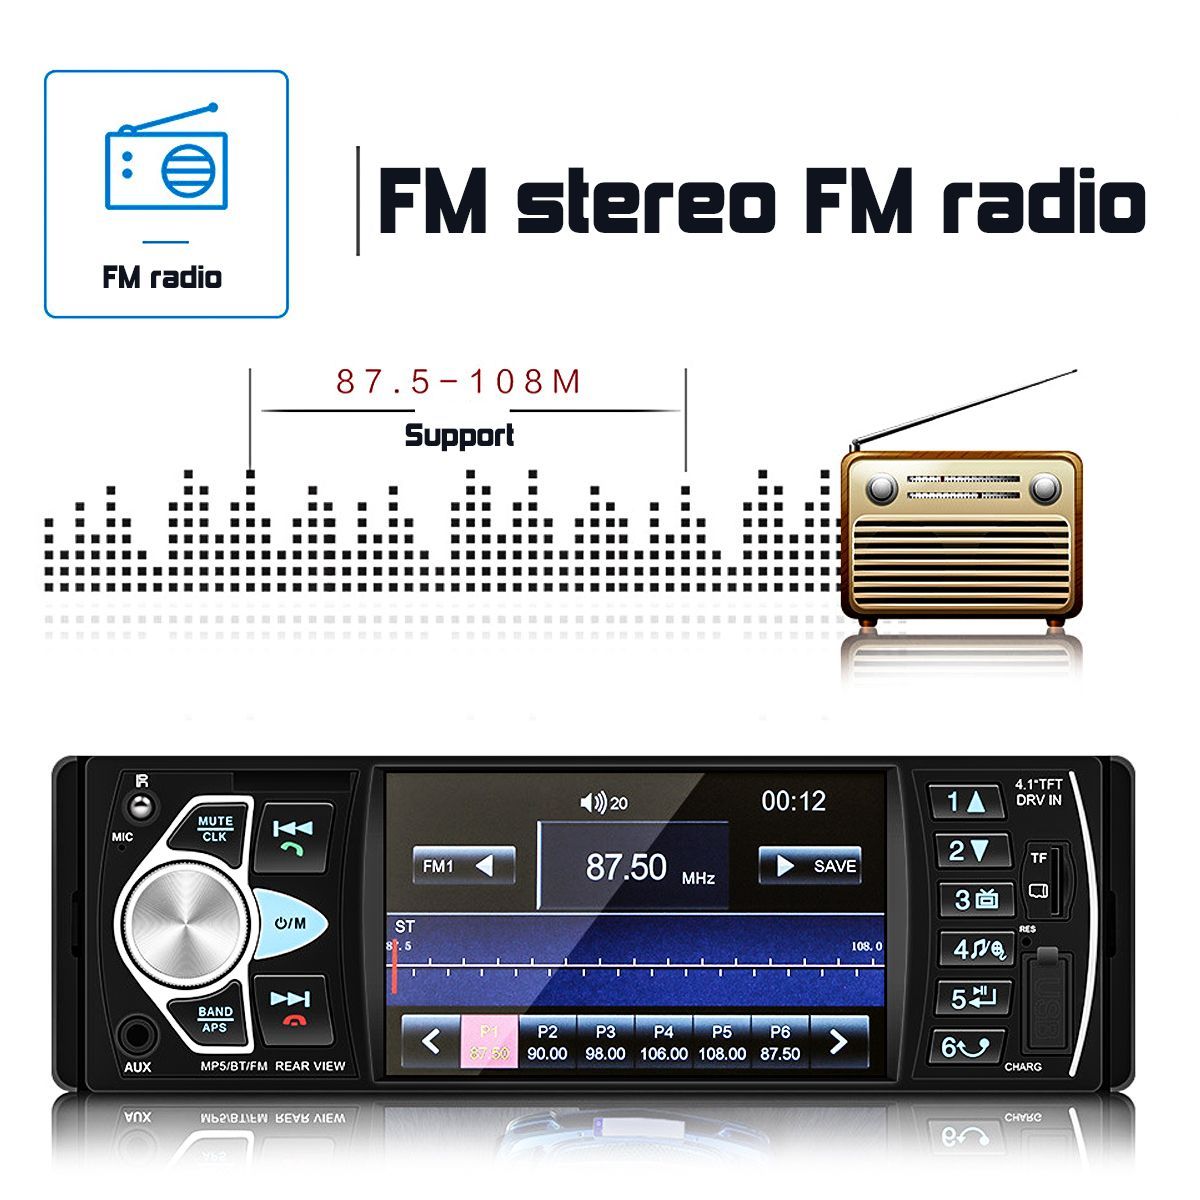 4022D-41-Inch-1Din-Wince-Car-Radio-Stereo-Auto-MP5-MP3-Player-HD-Screen-bluetooth-FM-AUX-TF-Support--1628974